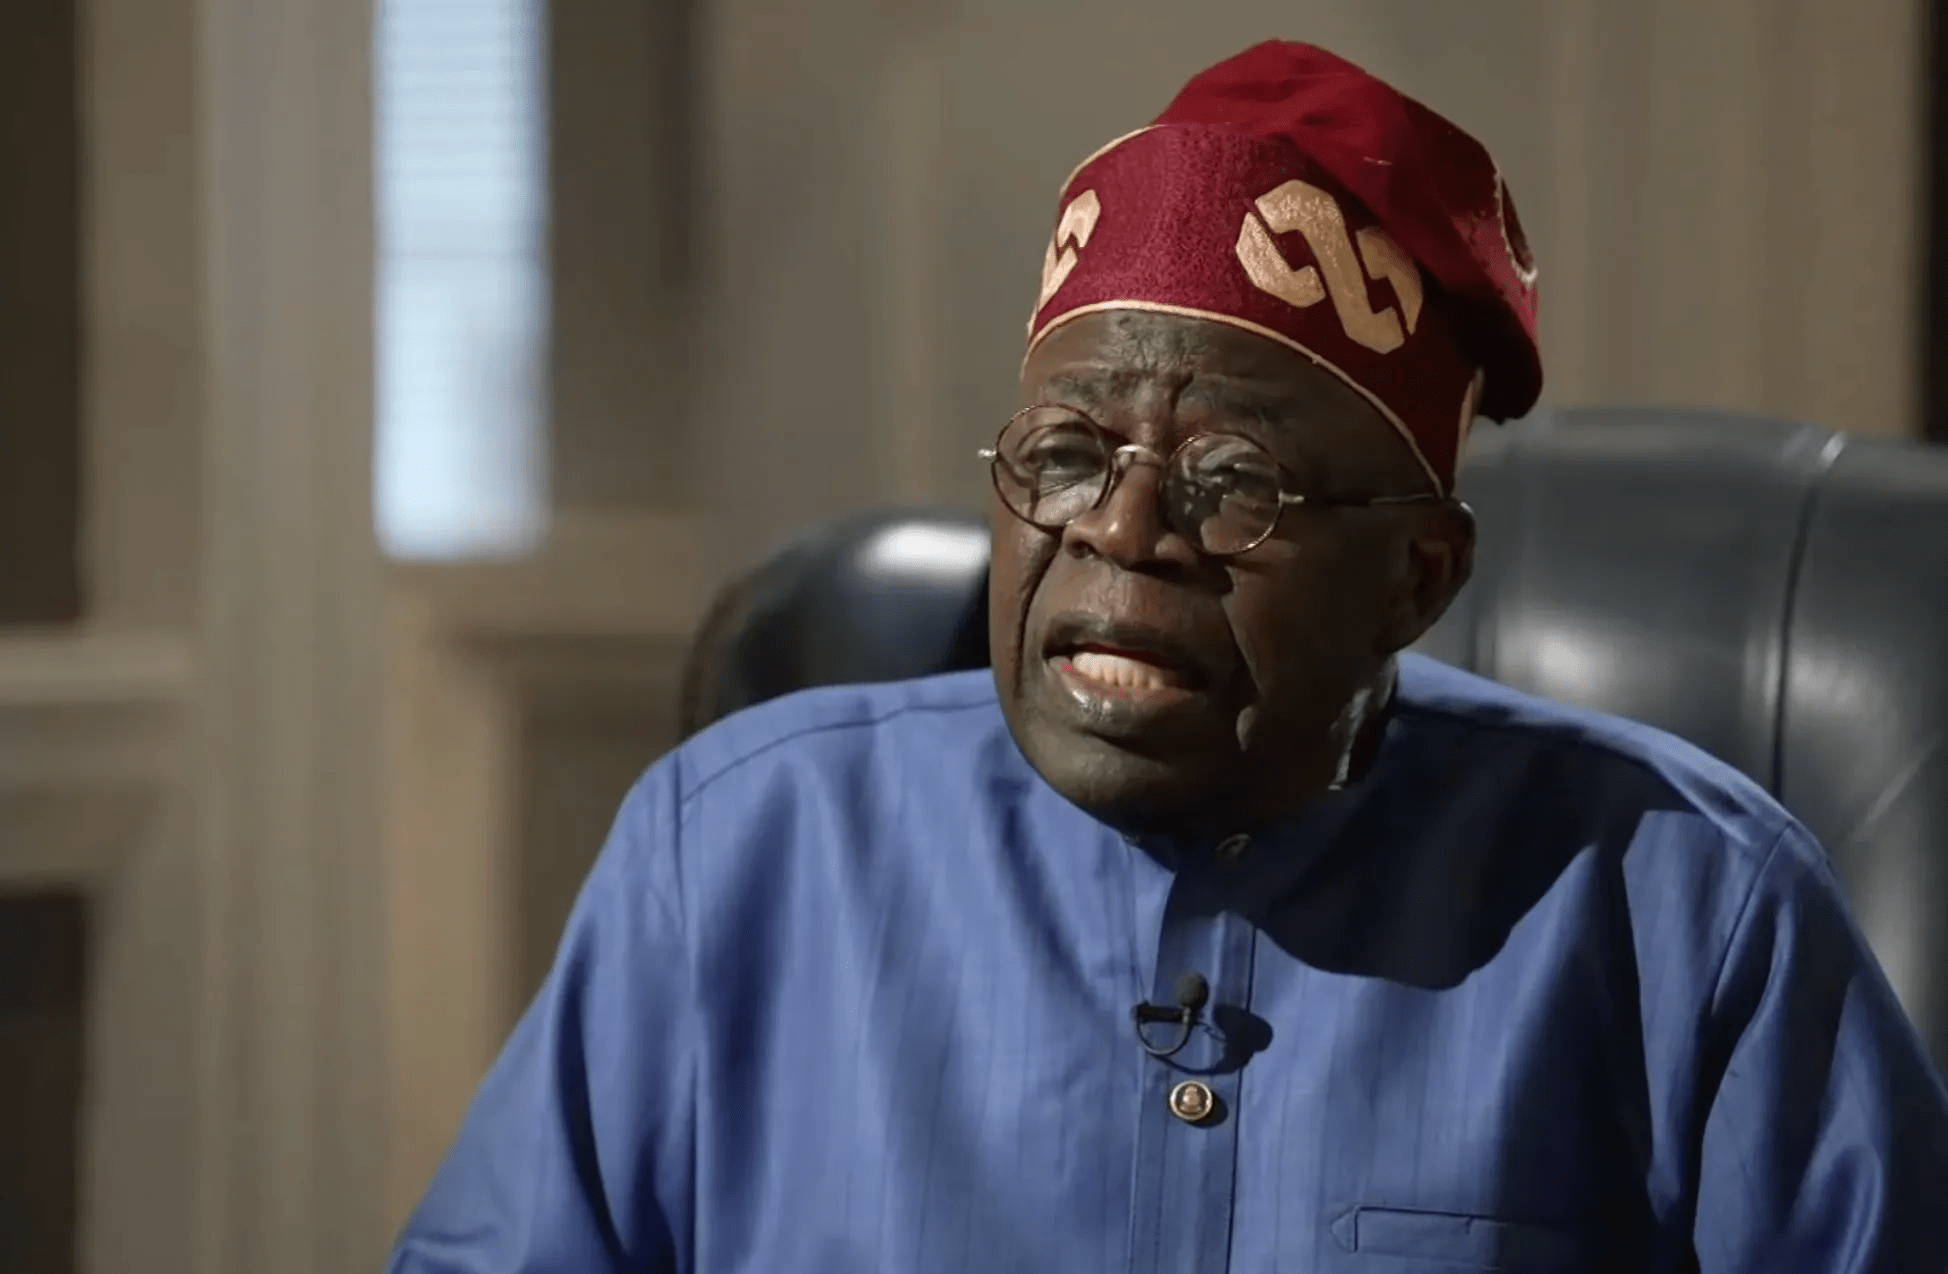 Full List: Tinubu Moves To Sell Government Stake in NNPC, 19 Other State-Run Companies To Raise Funds